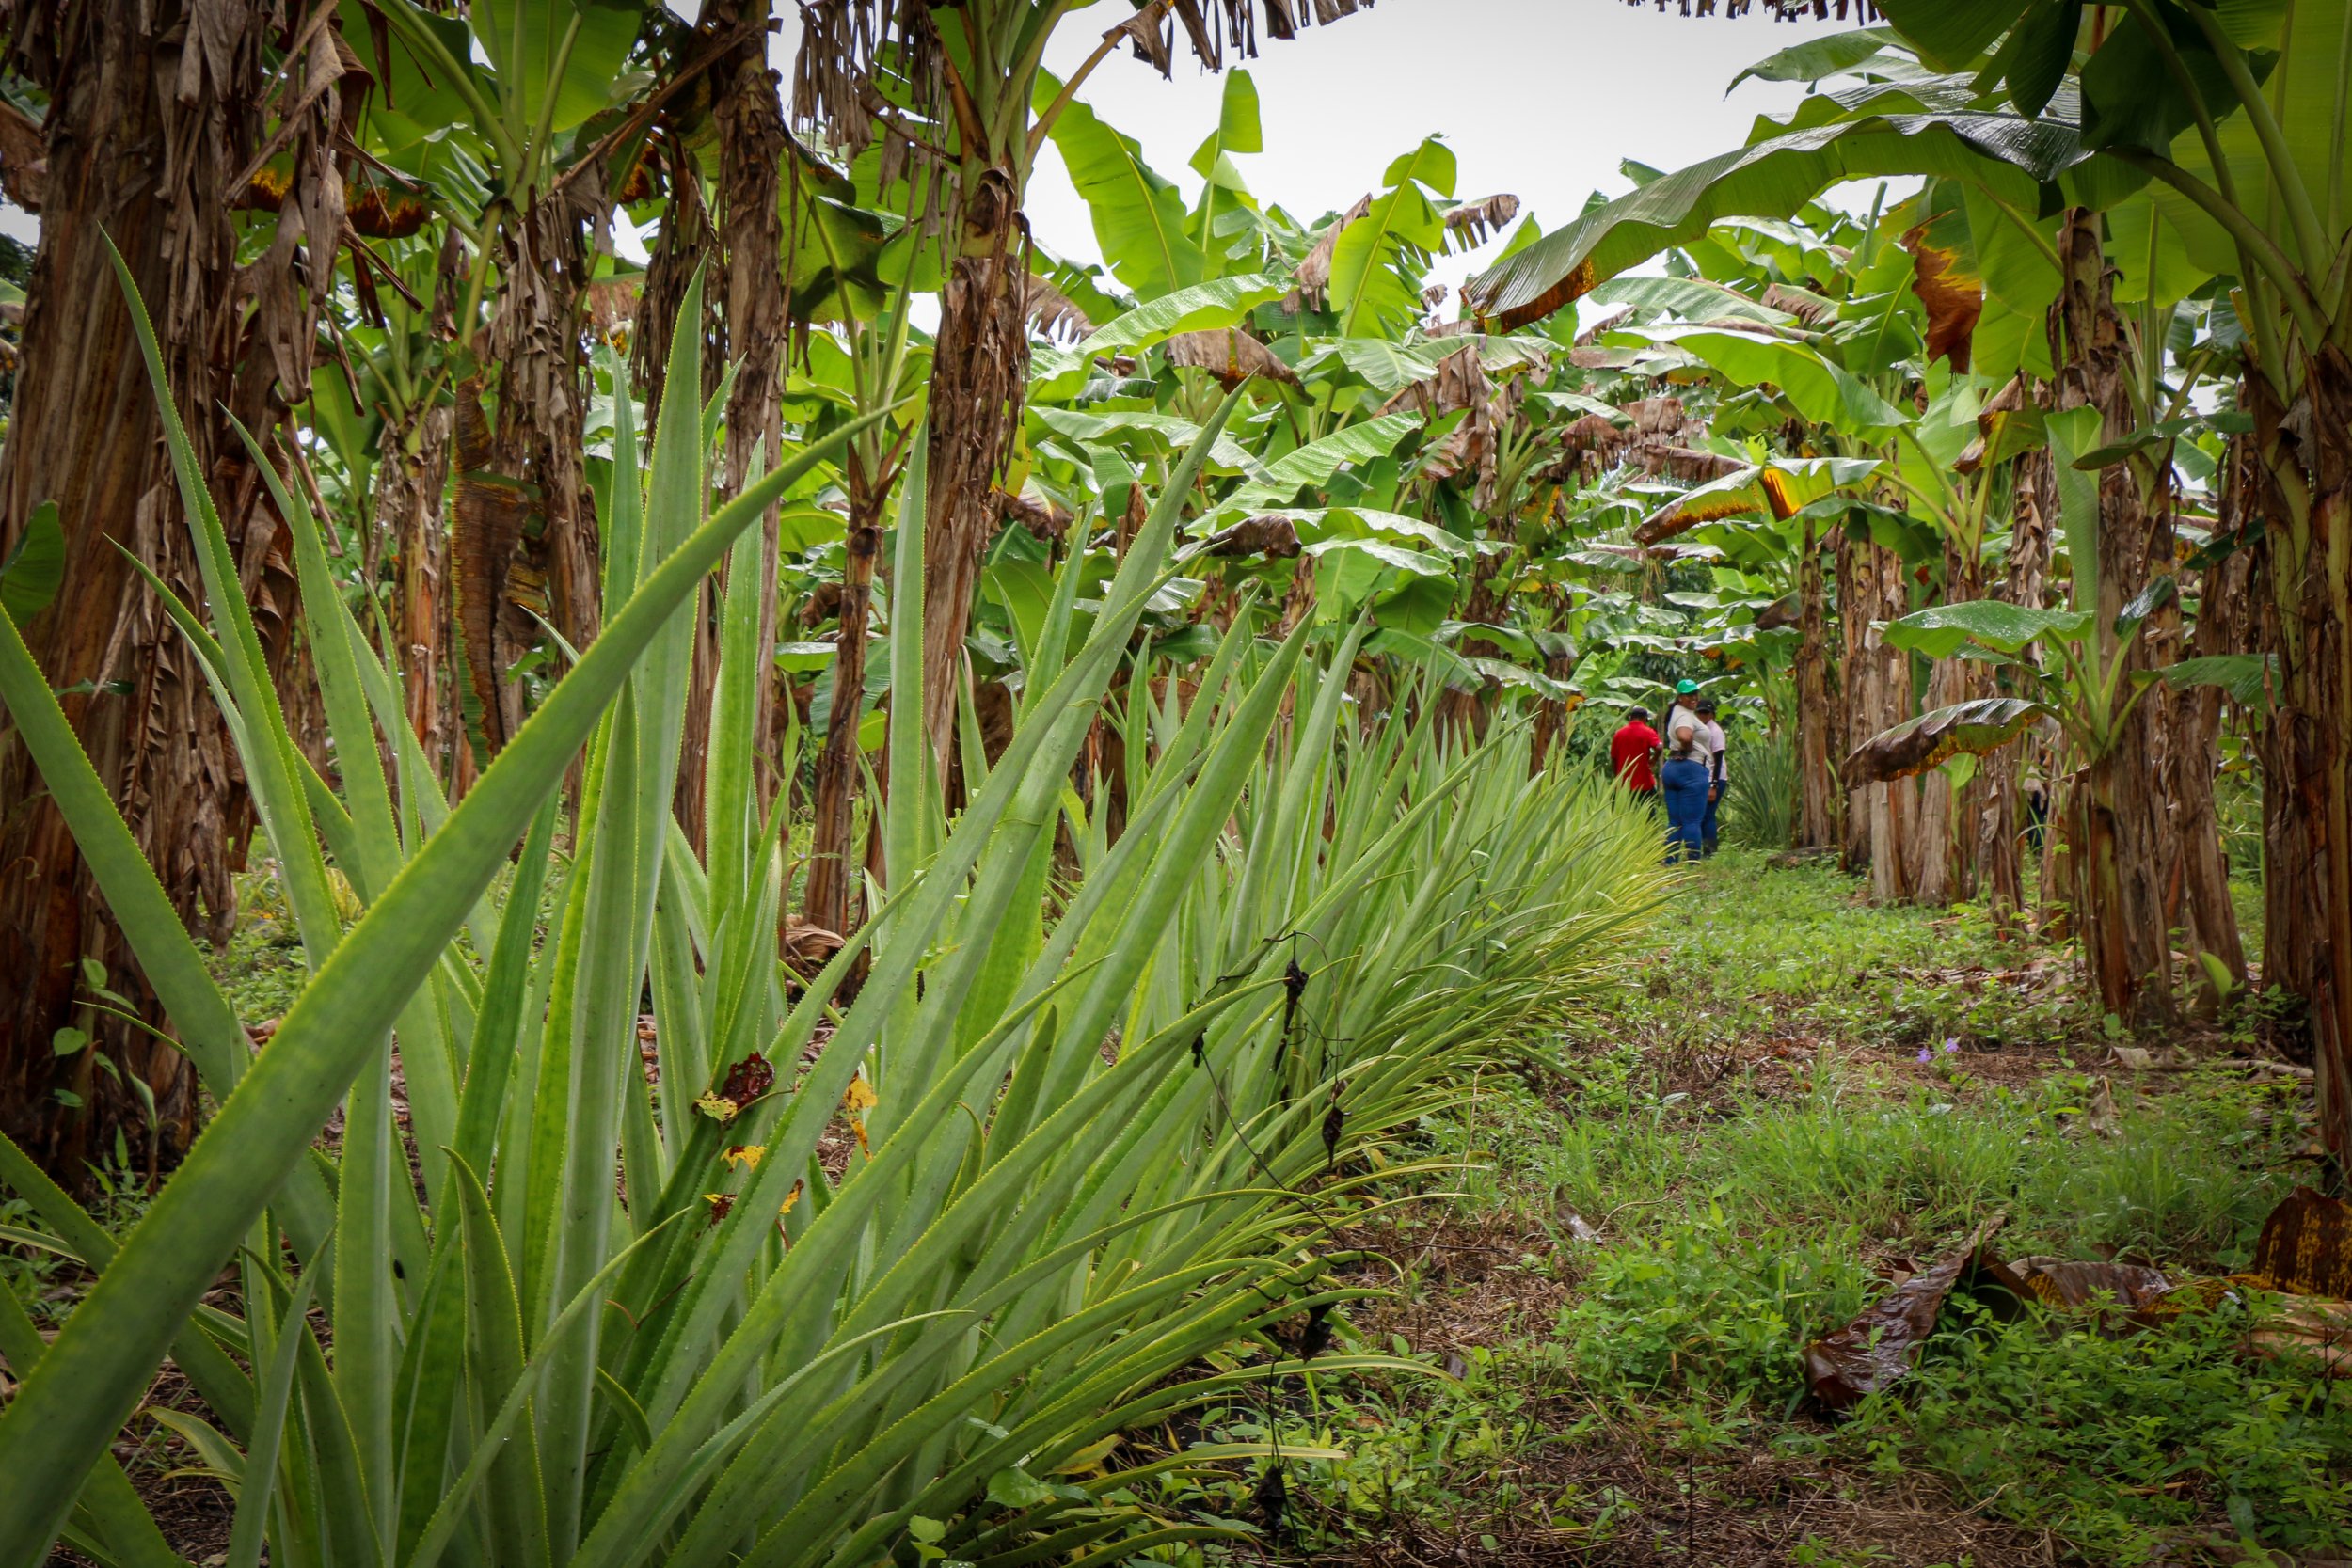 An example of pineapple growing under the shade of plantains in the agroforestry system of Sintia and Montiel's neighbor, Jorge Yam.